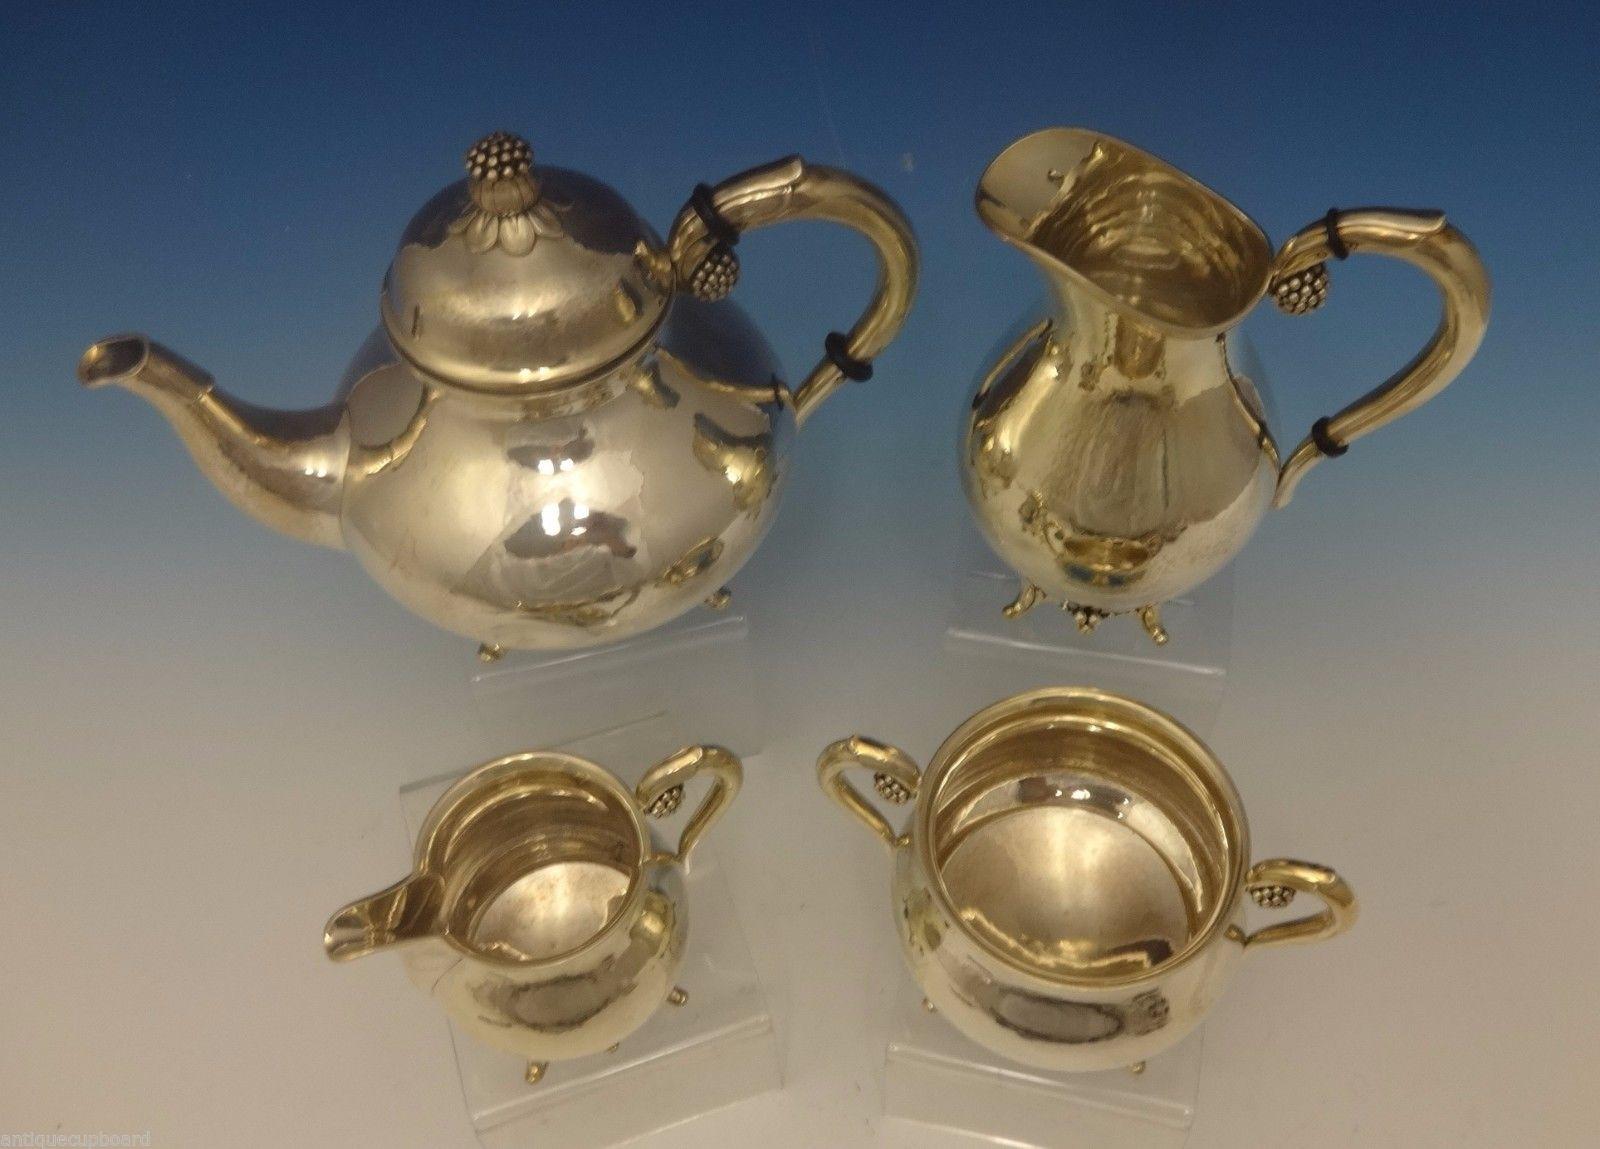 Grann & Laglye
This lovely sterling silver 4-piece tea set was made by Grann & Laglye of Denmark. The pieces have a 3-D flower motif with beads on the finials, handles, and detail by the feet. Retailed by Dana Comp mark. The set dates from the